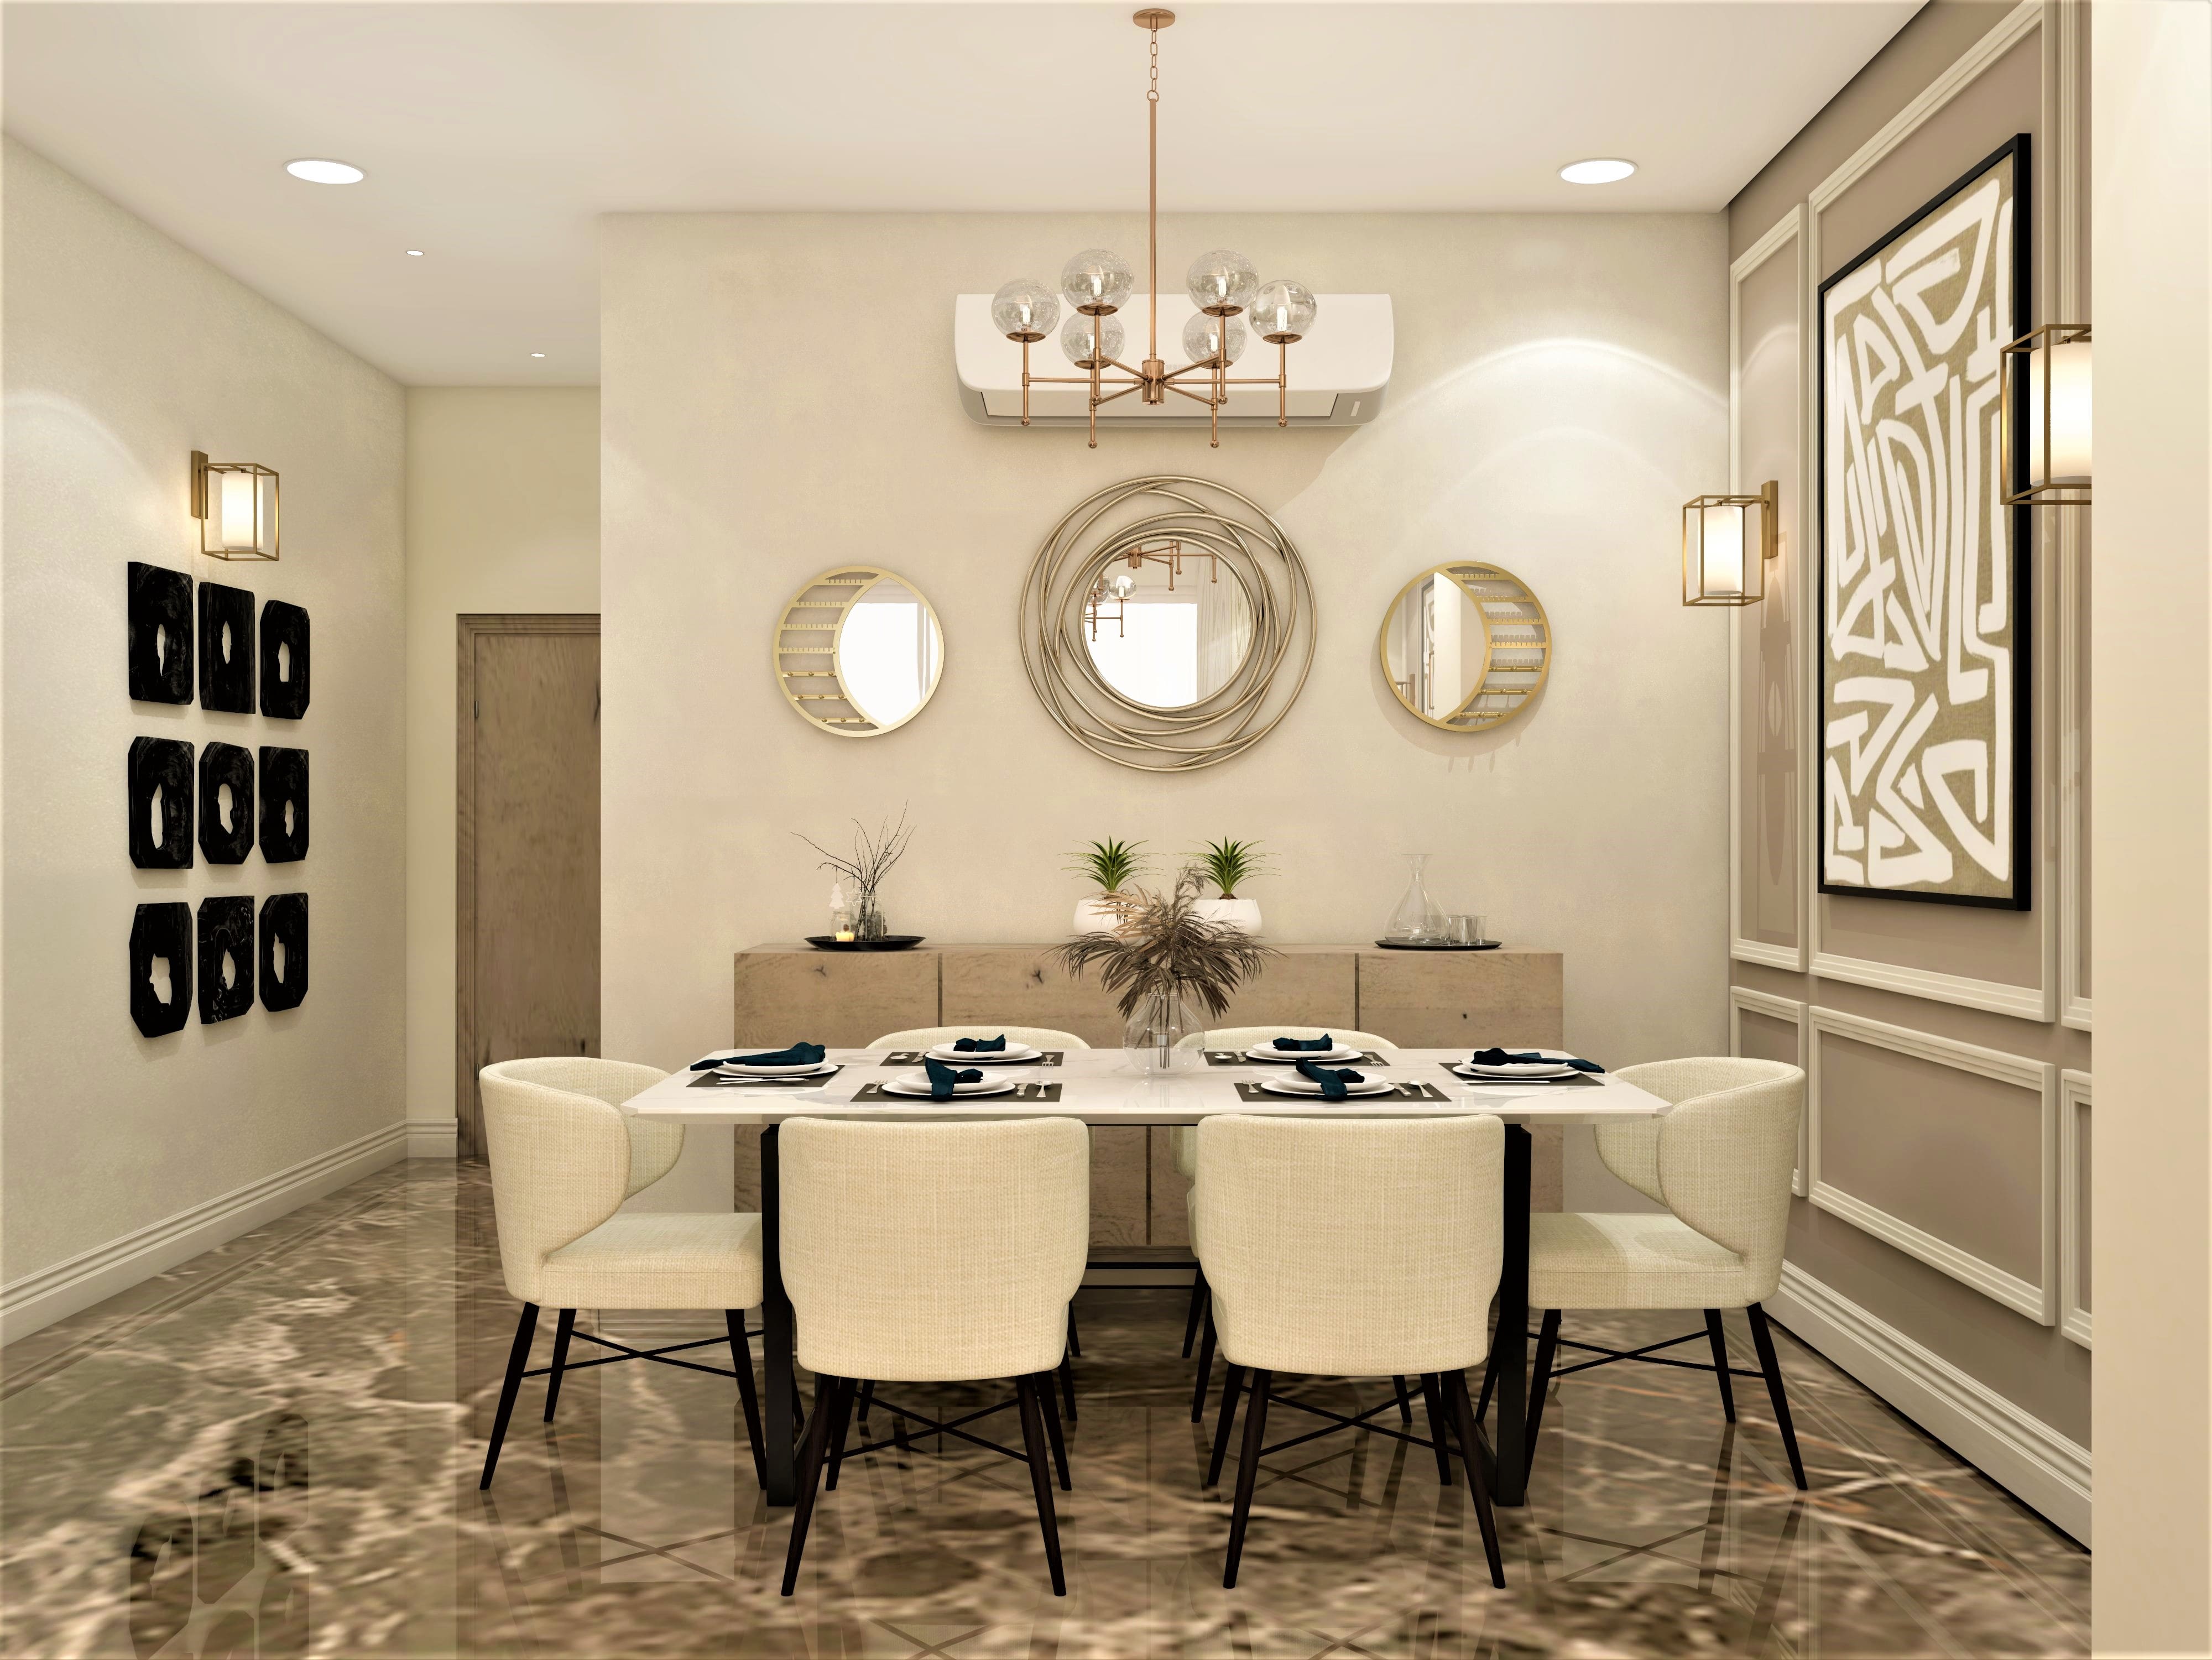 Luxurious and elegant dining room design - Beautiful Homes